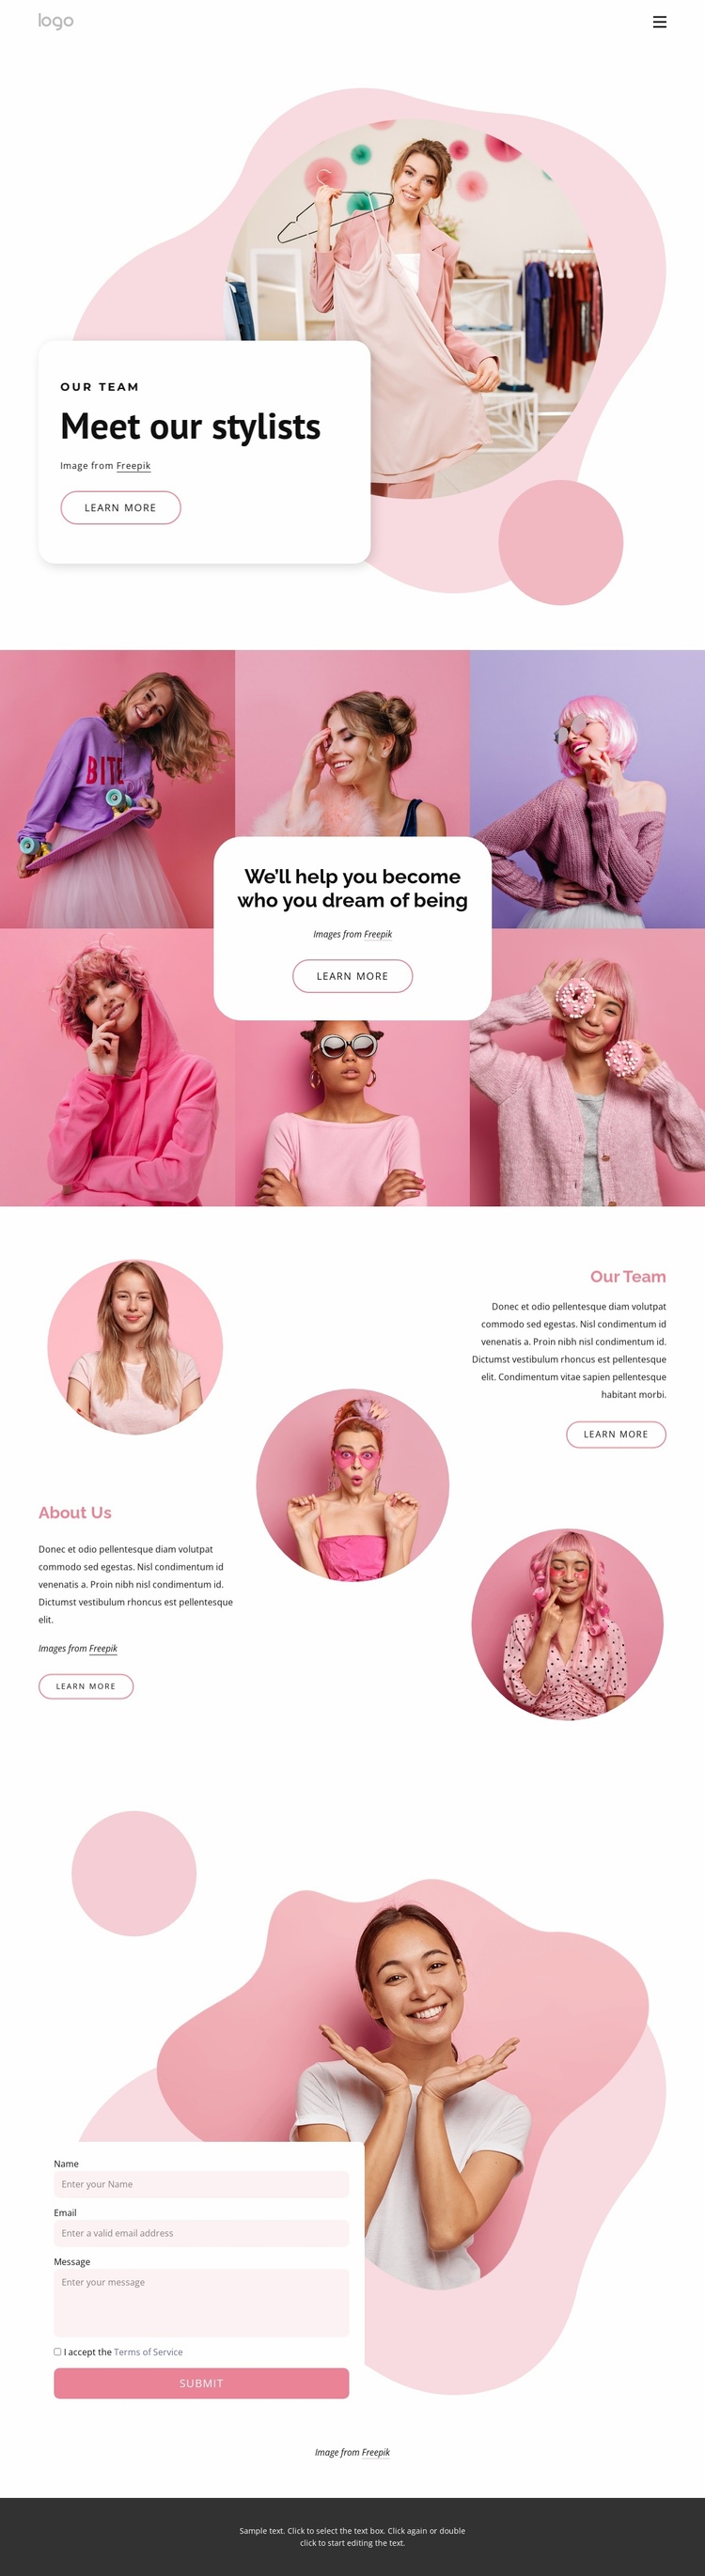 Meet our stylists Website Template